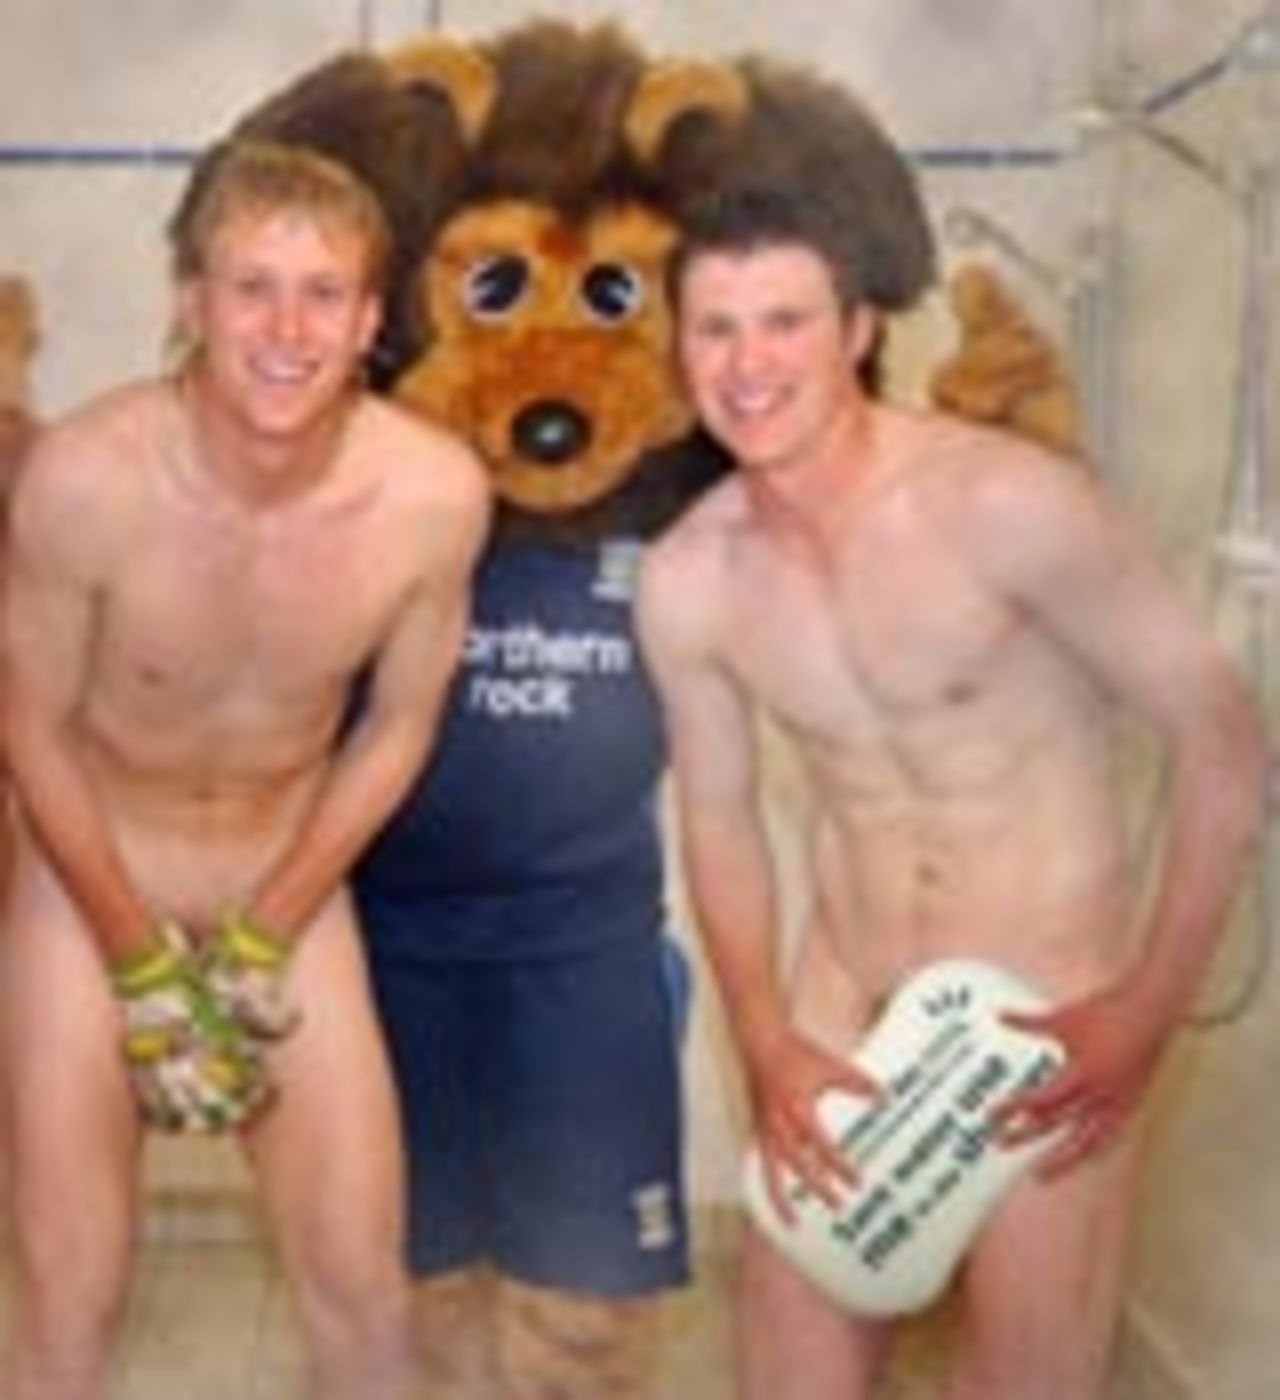 Durham players strip down for a good cause, June 7 2004